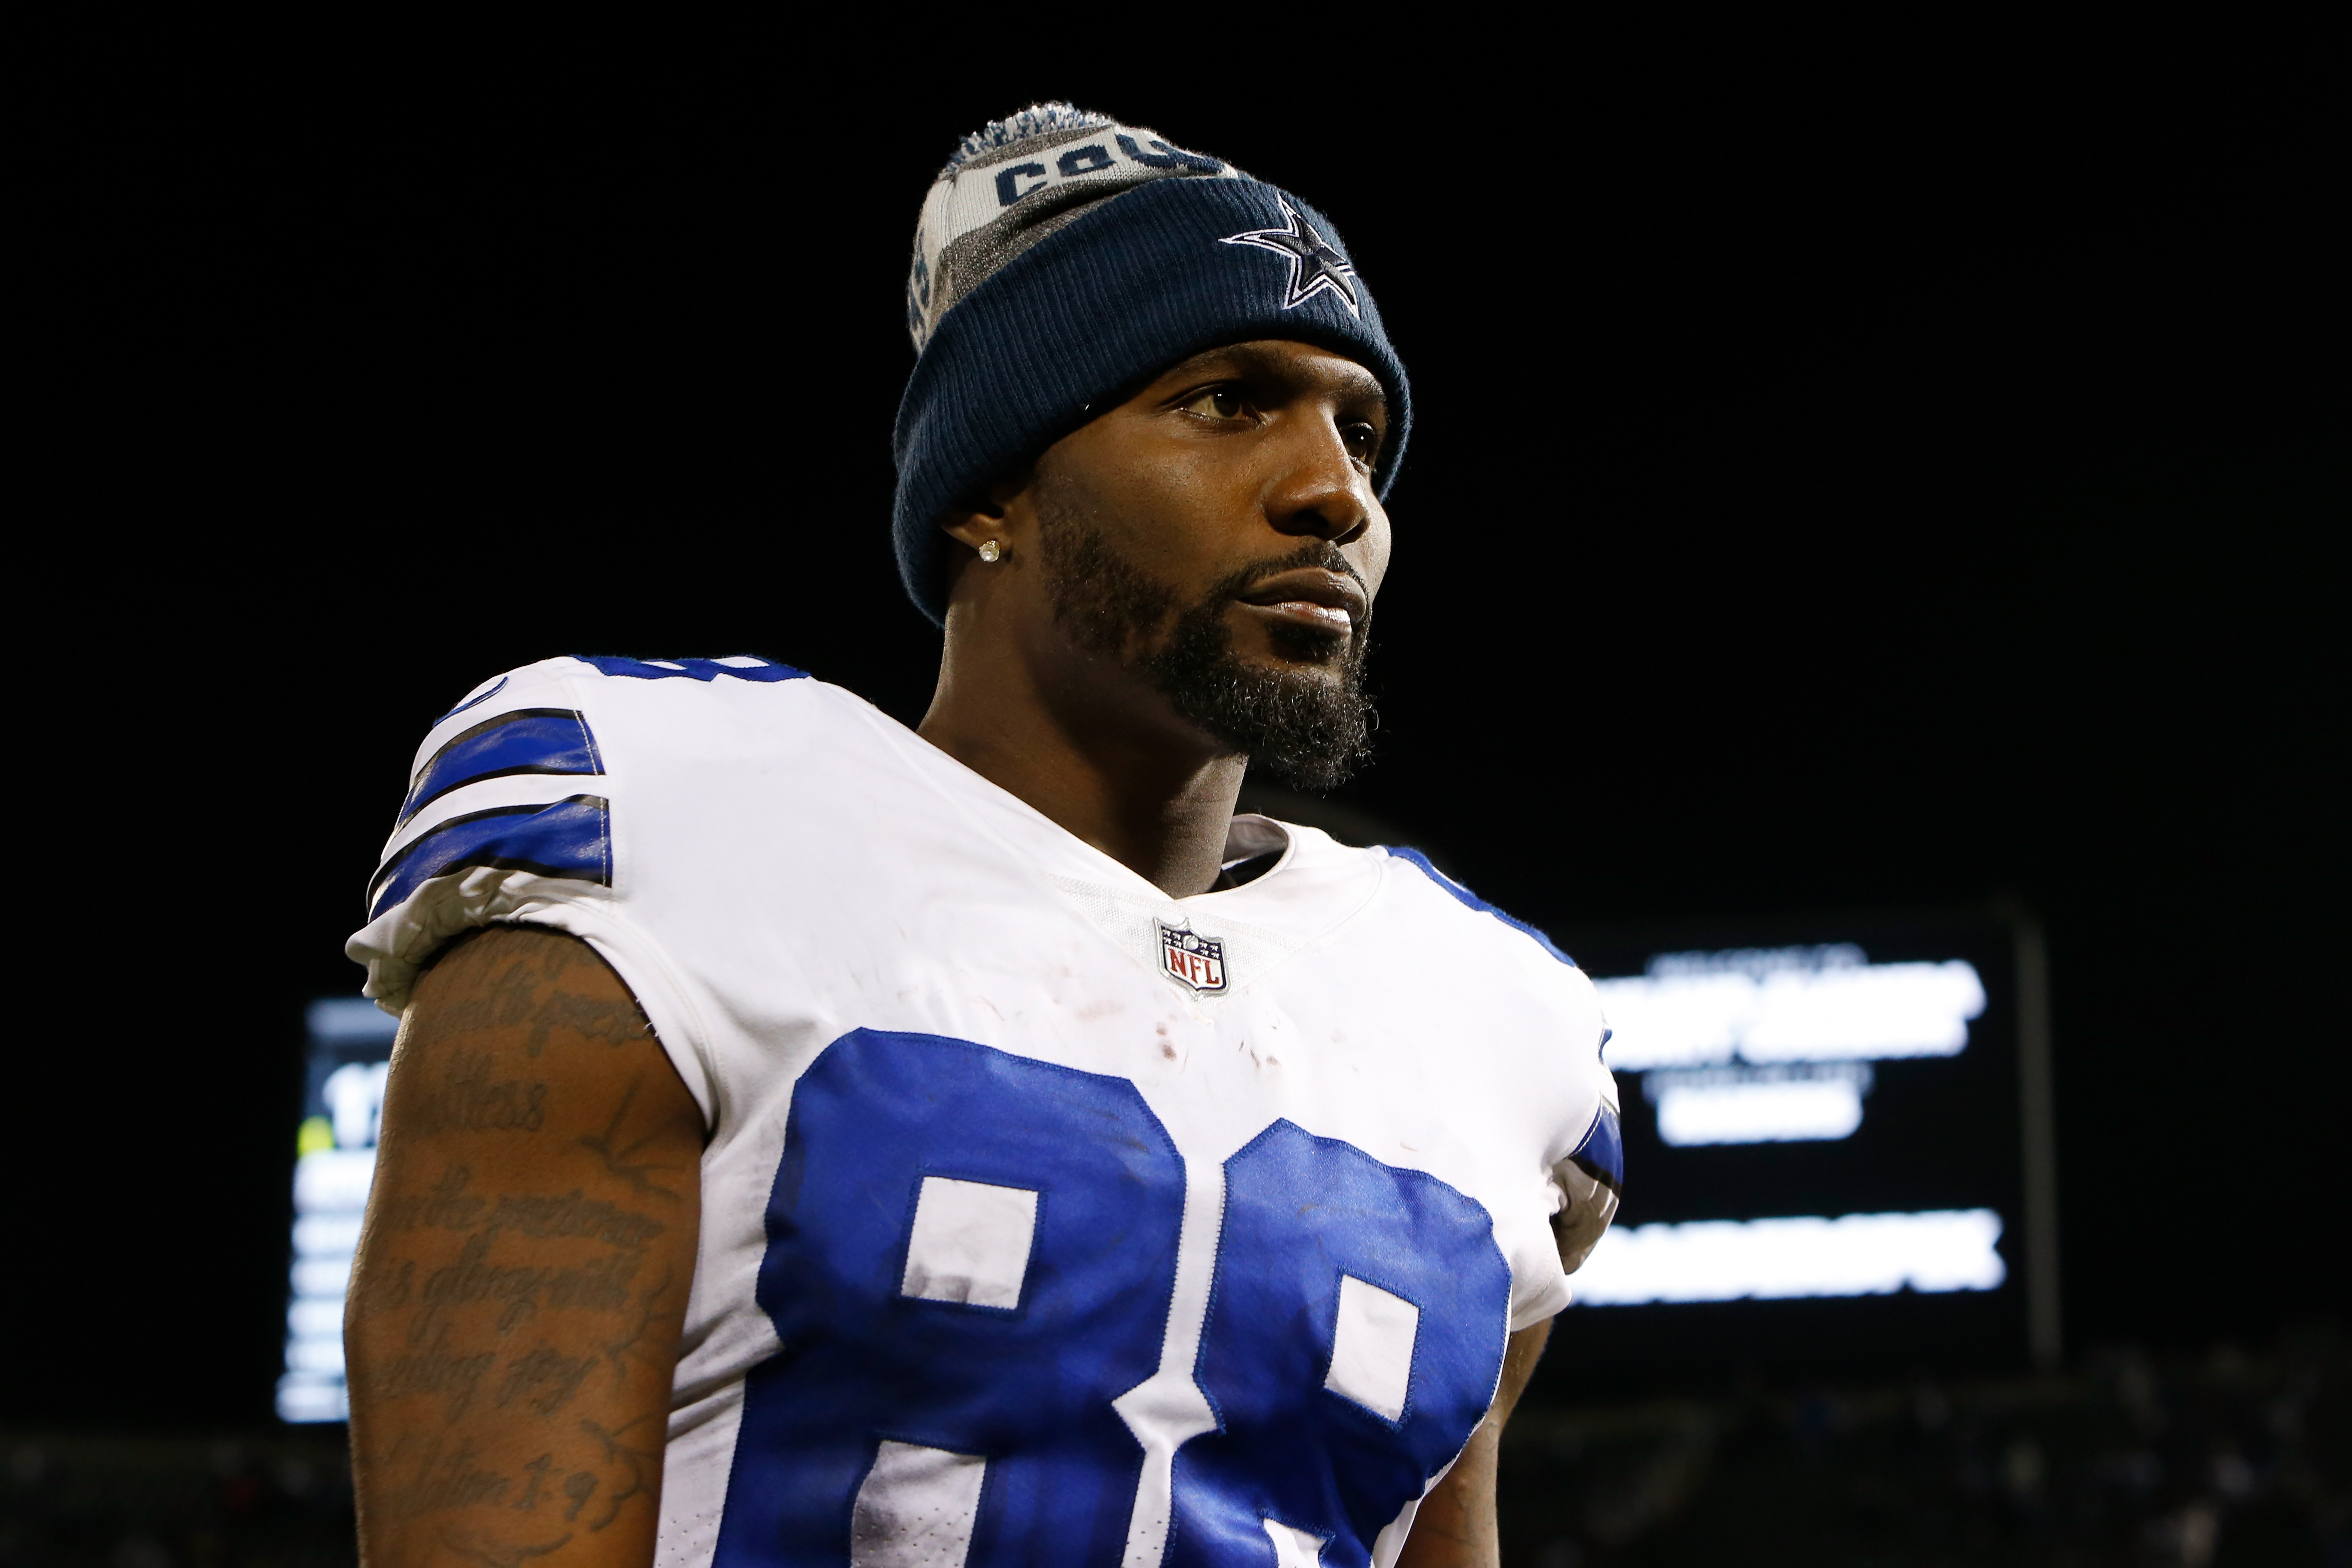 Dez Bryant Reacts To CeeDee Lamb Taking No. 88 For The Cowboys